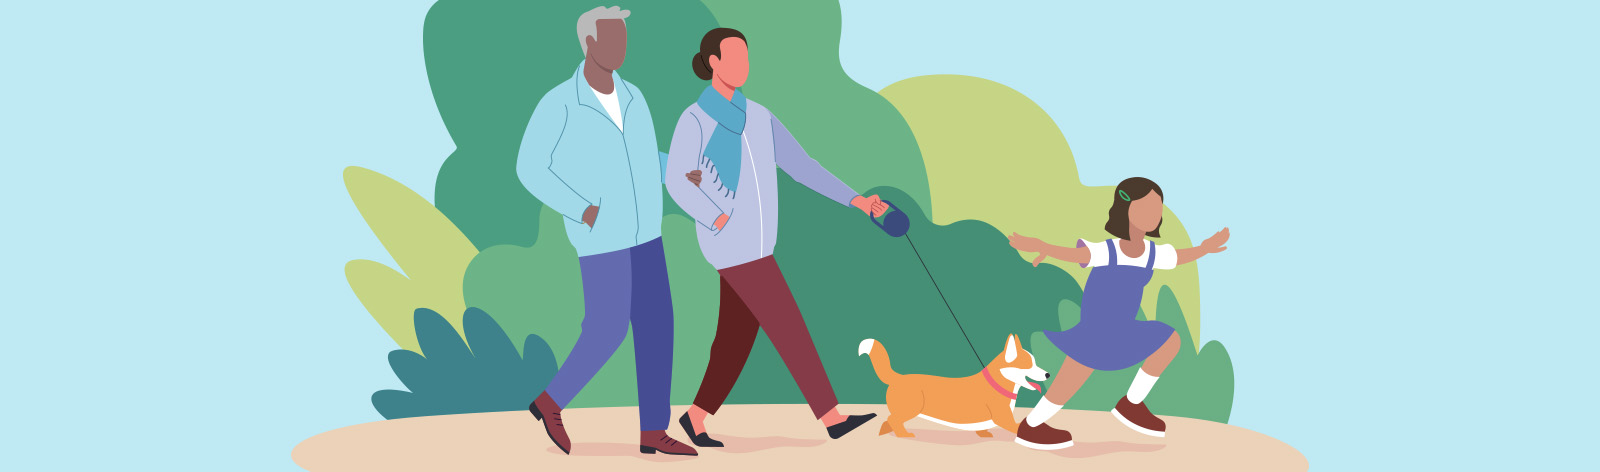 illustrated image of family walking outside with dog